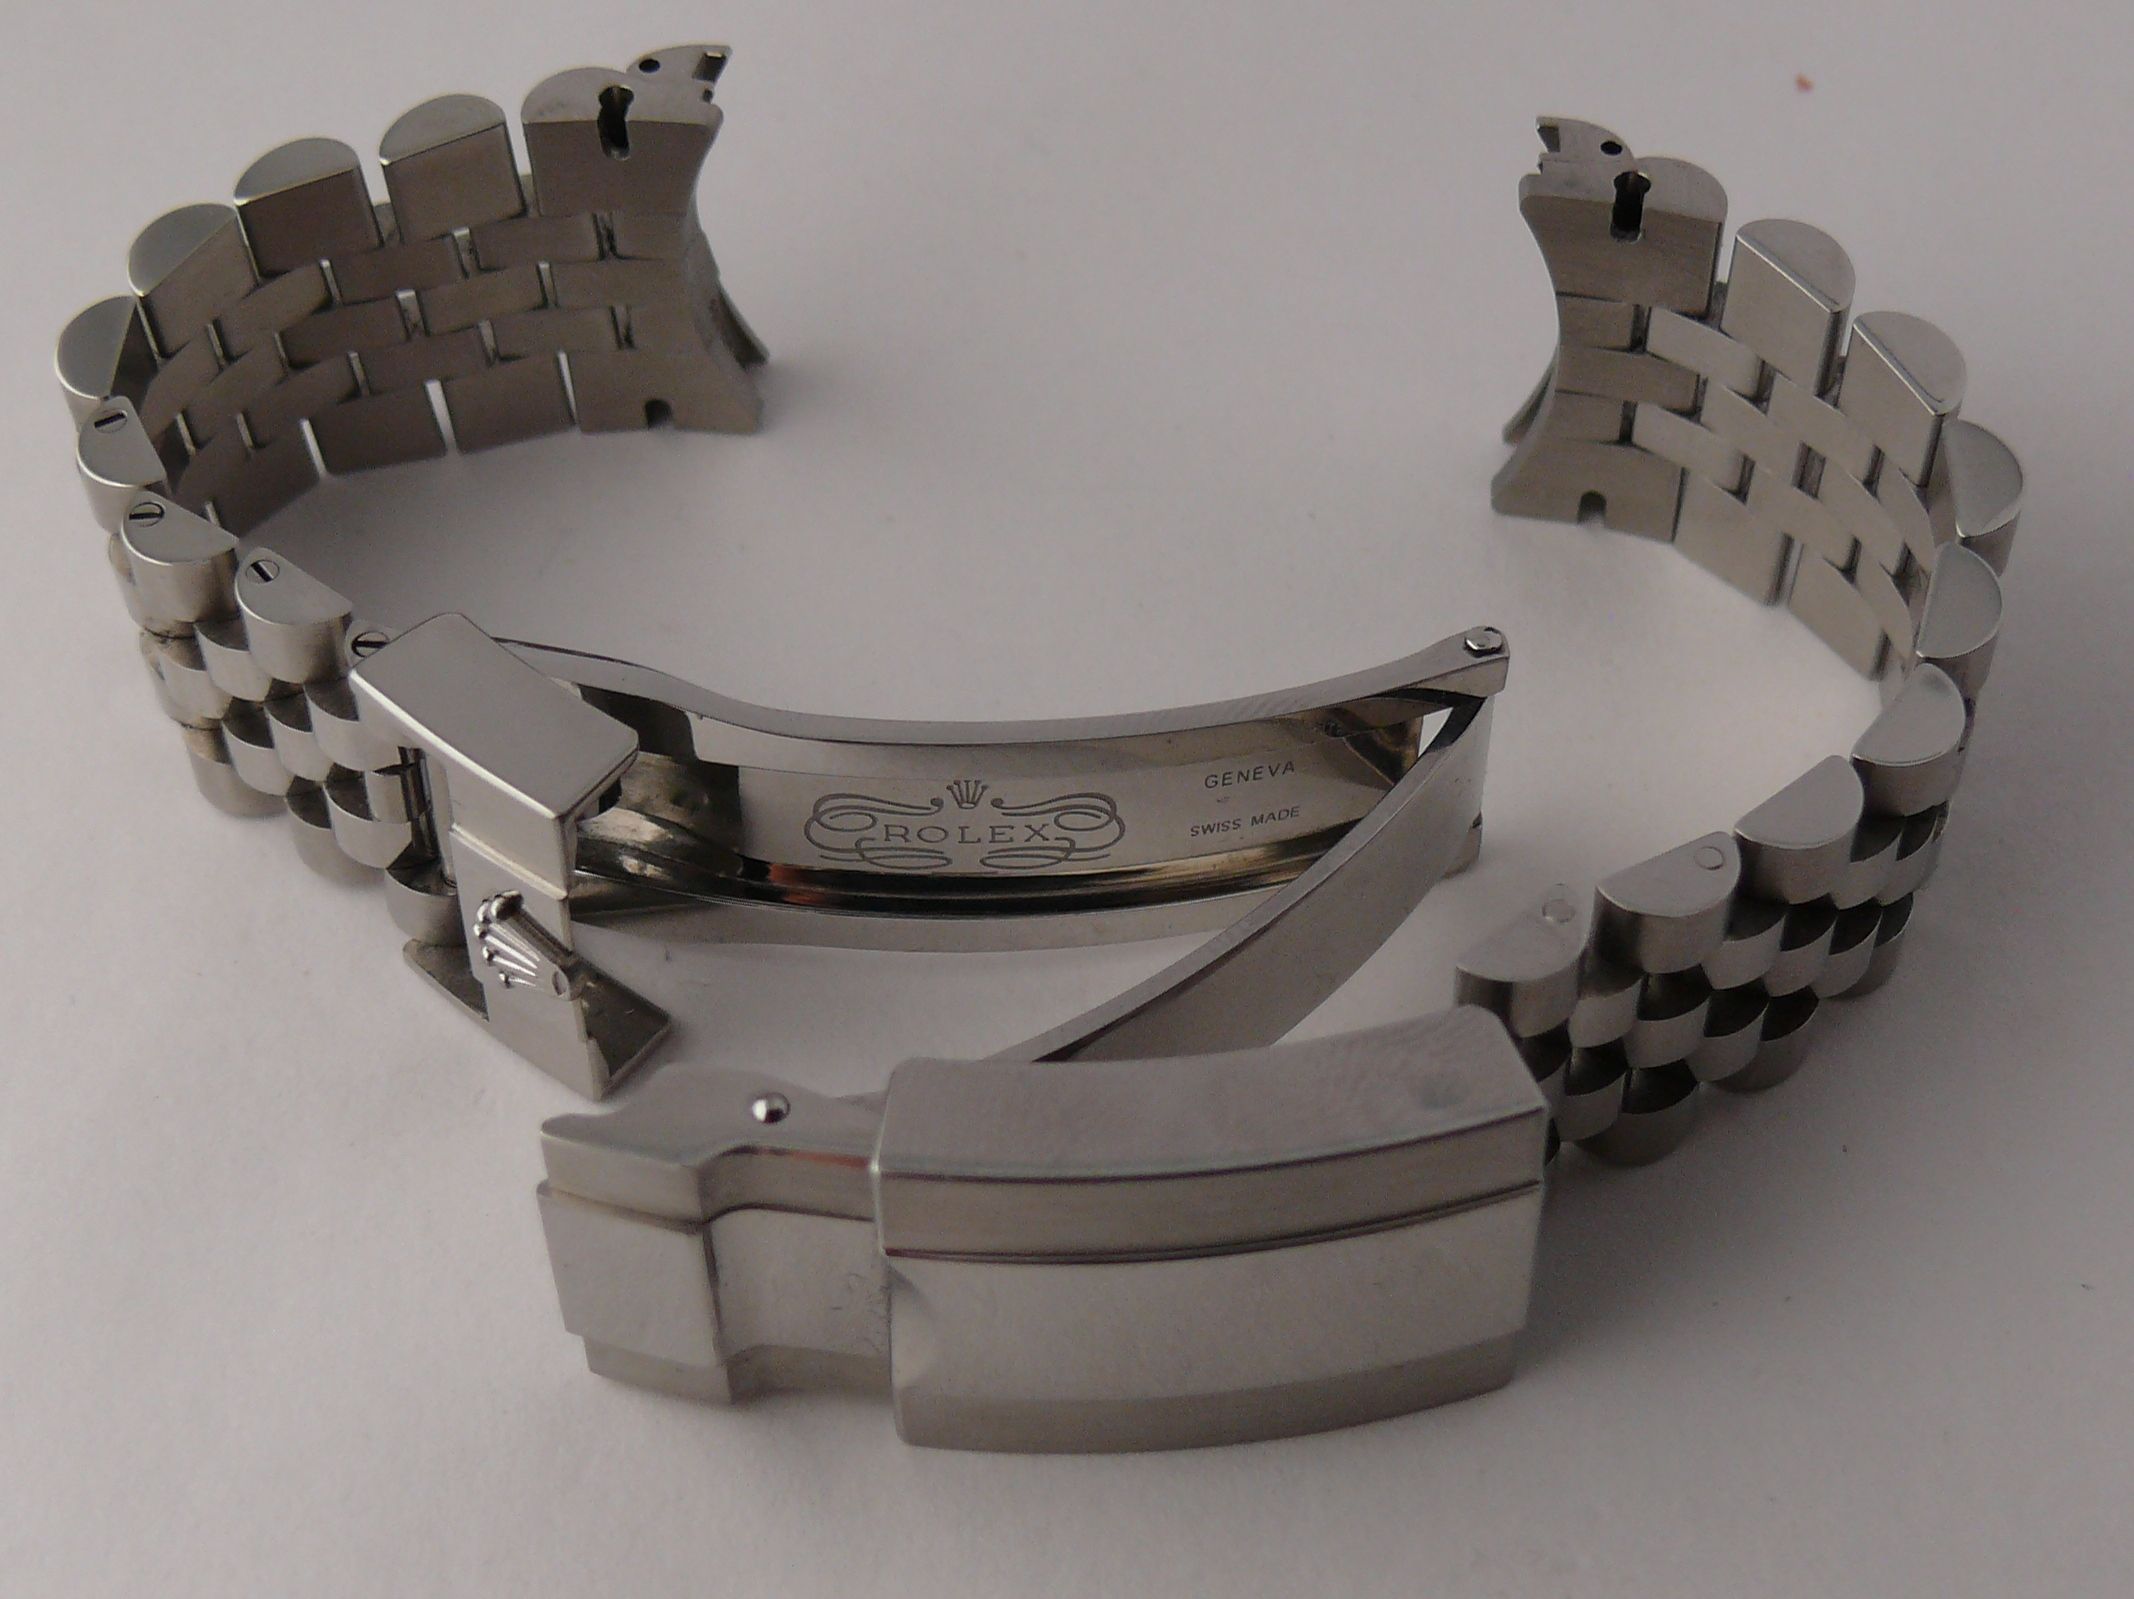 Genuine Rolex 20 mm Jubilee Bracelet 69200 126710 BLNR BLRO. This bracelet is clean and currently - Image 8 of 11